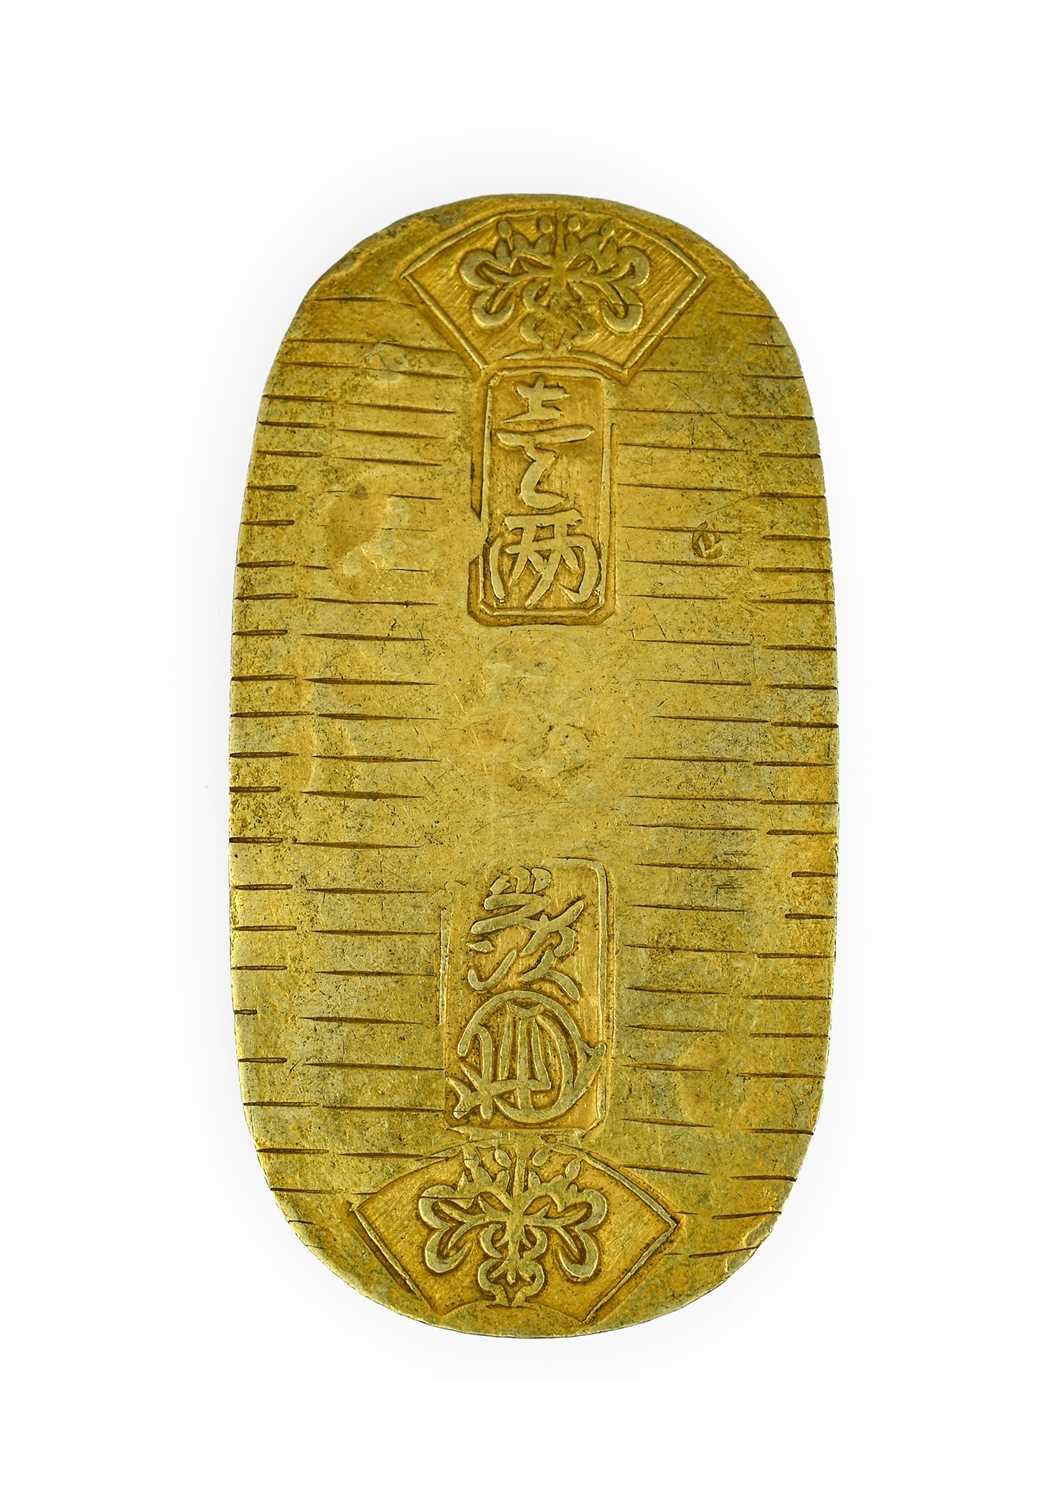 Japan, Hammered Gold Koban (1 Ryo), no date (issued during the Bunsei era 1818-1830), an oval-shaped